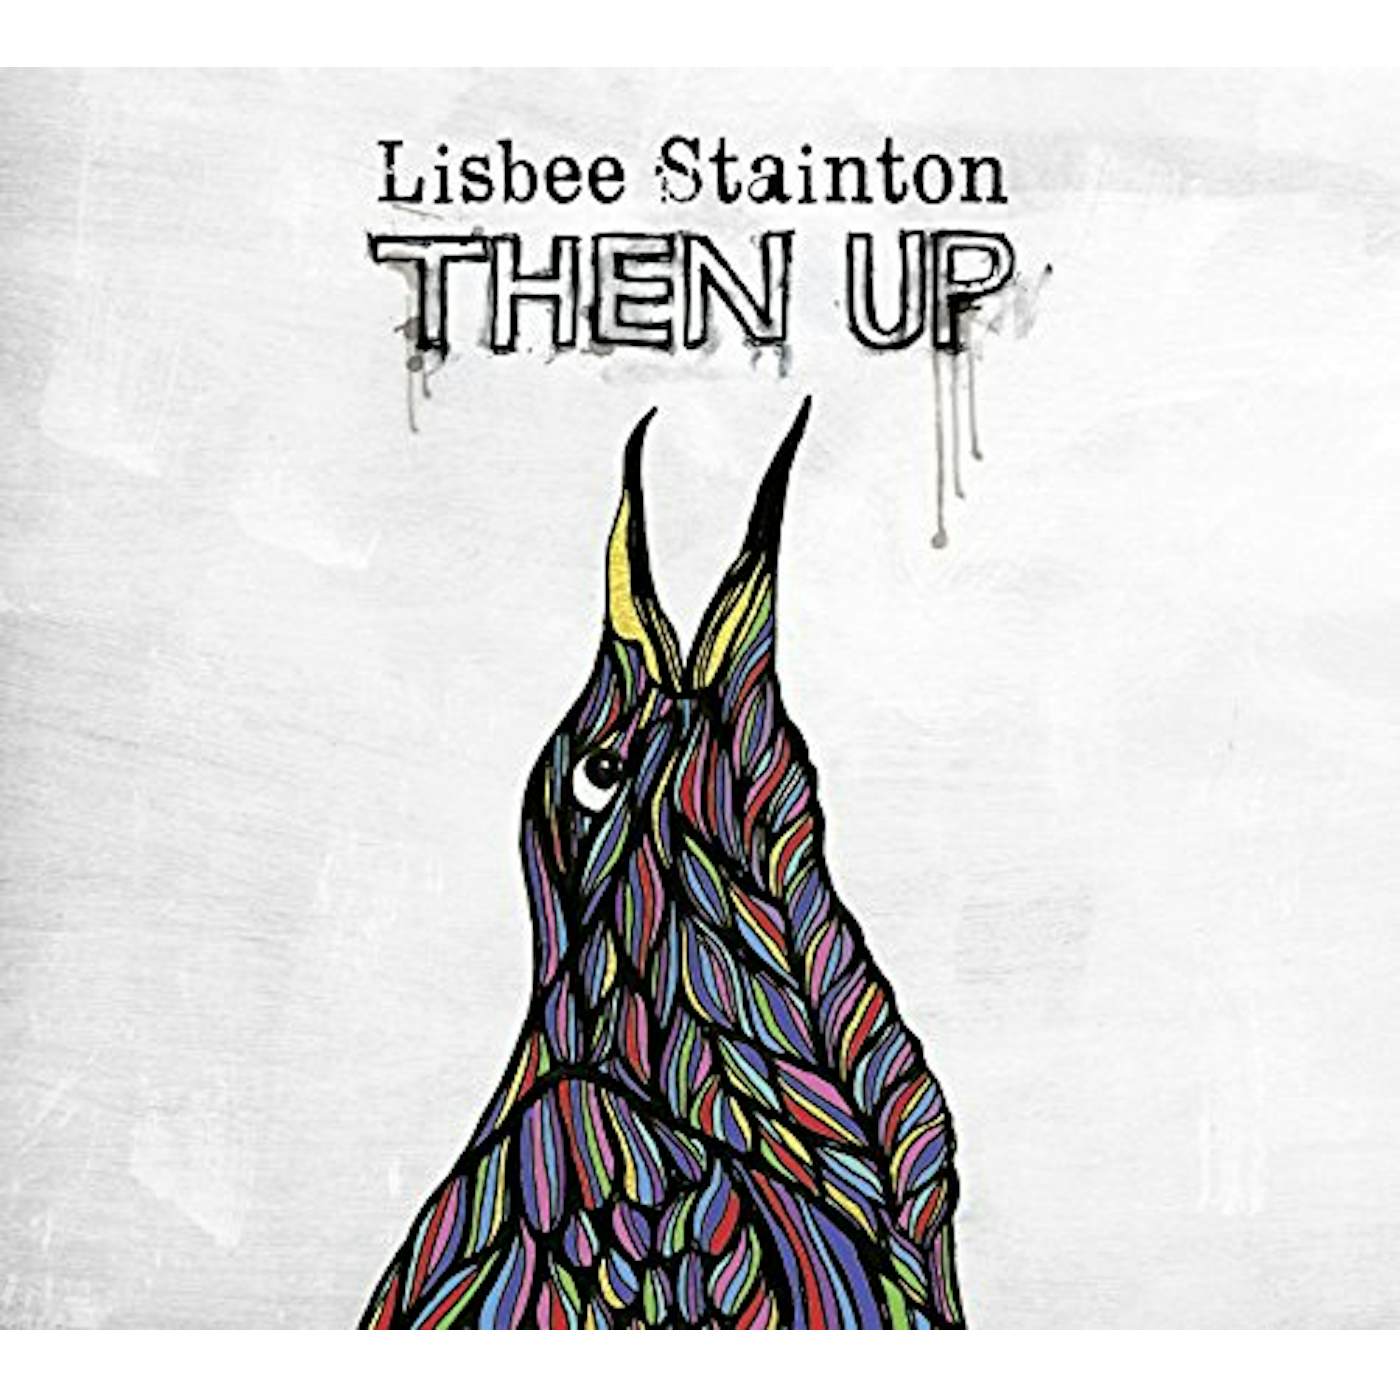 Lisbee Stainton THEN UP CD